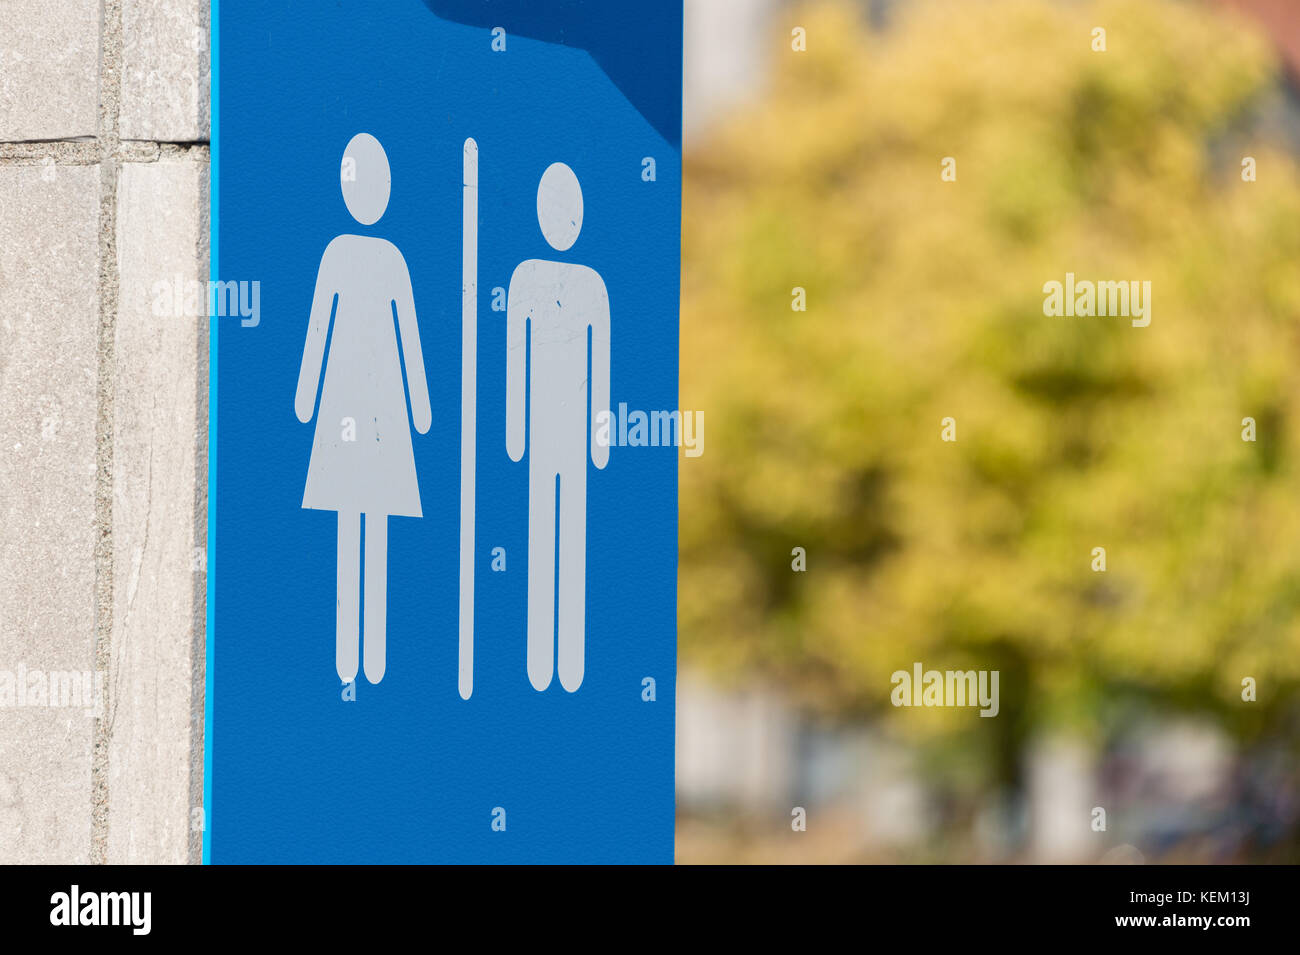 Man and woman icons, toilet sign in Montreal with autumn foliage in background Stock Photo